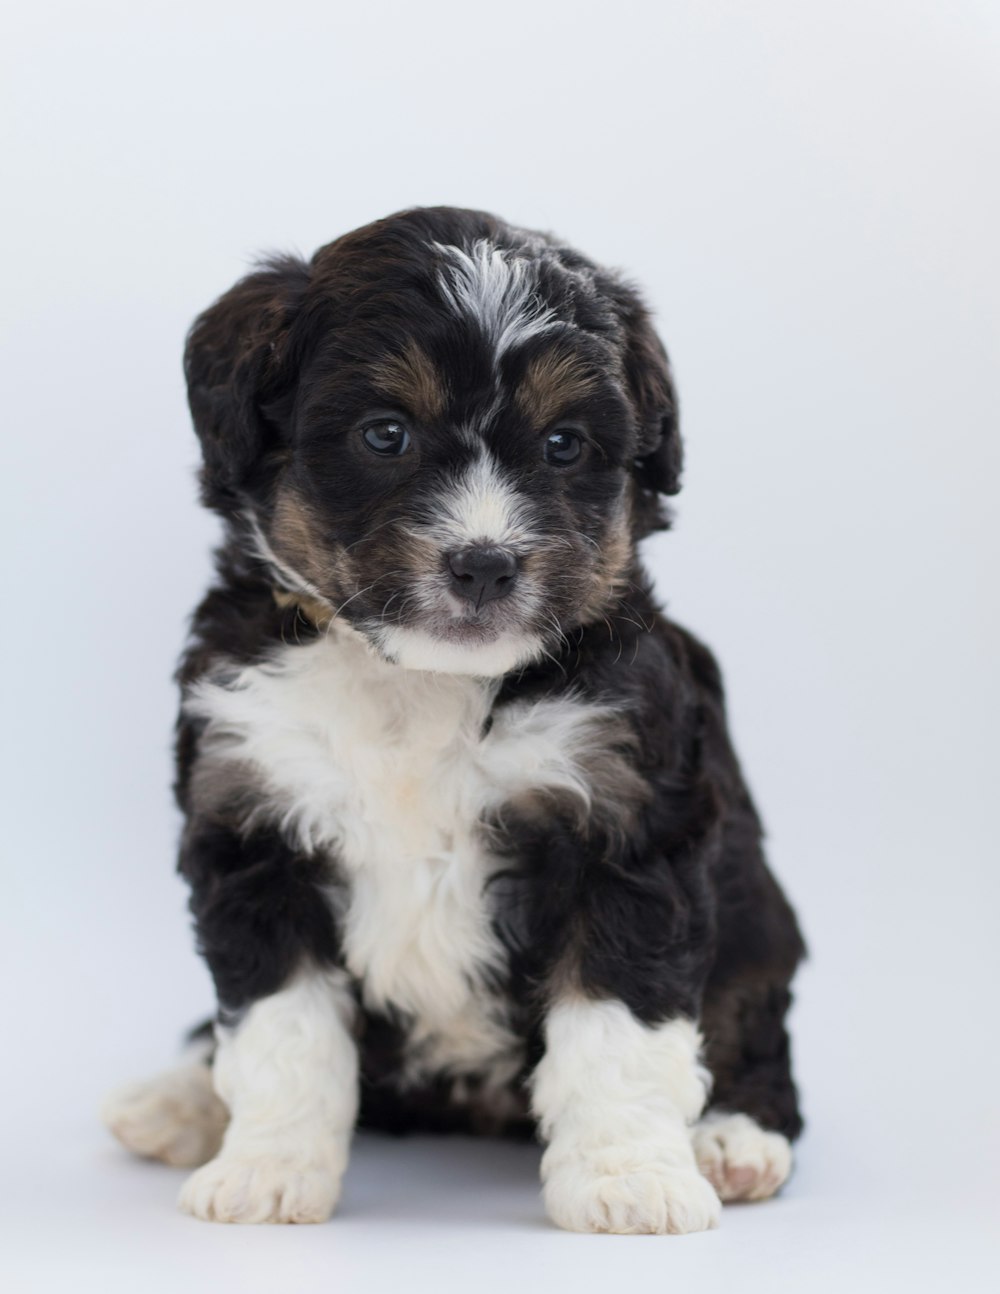 a black and white puppy sitting on a white background